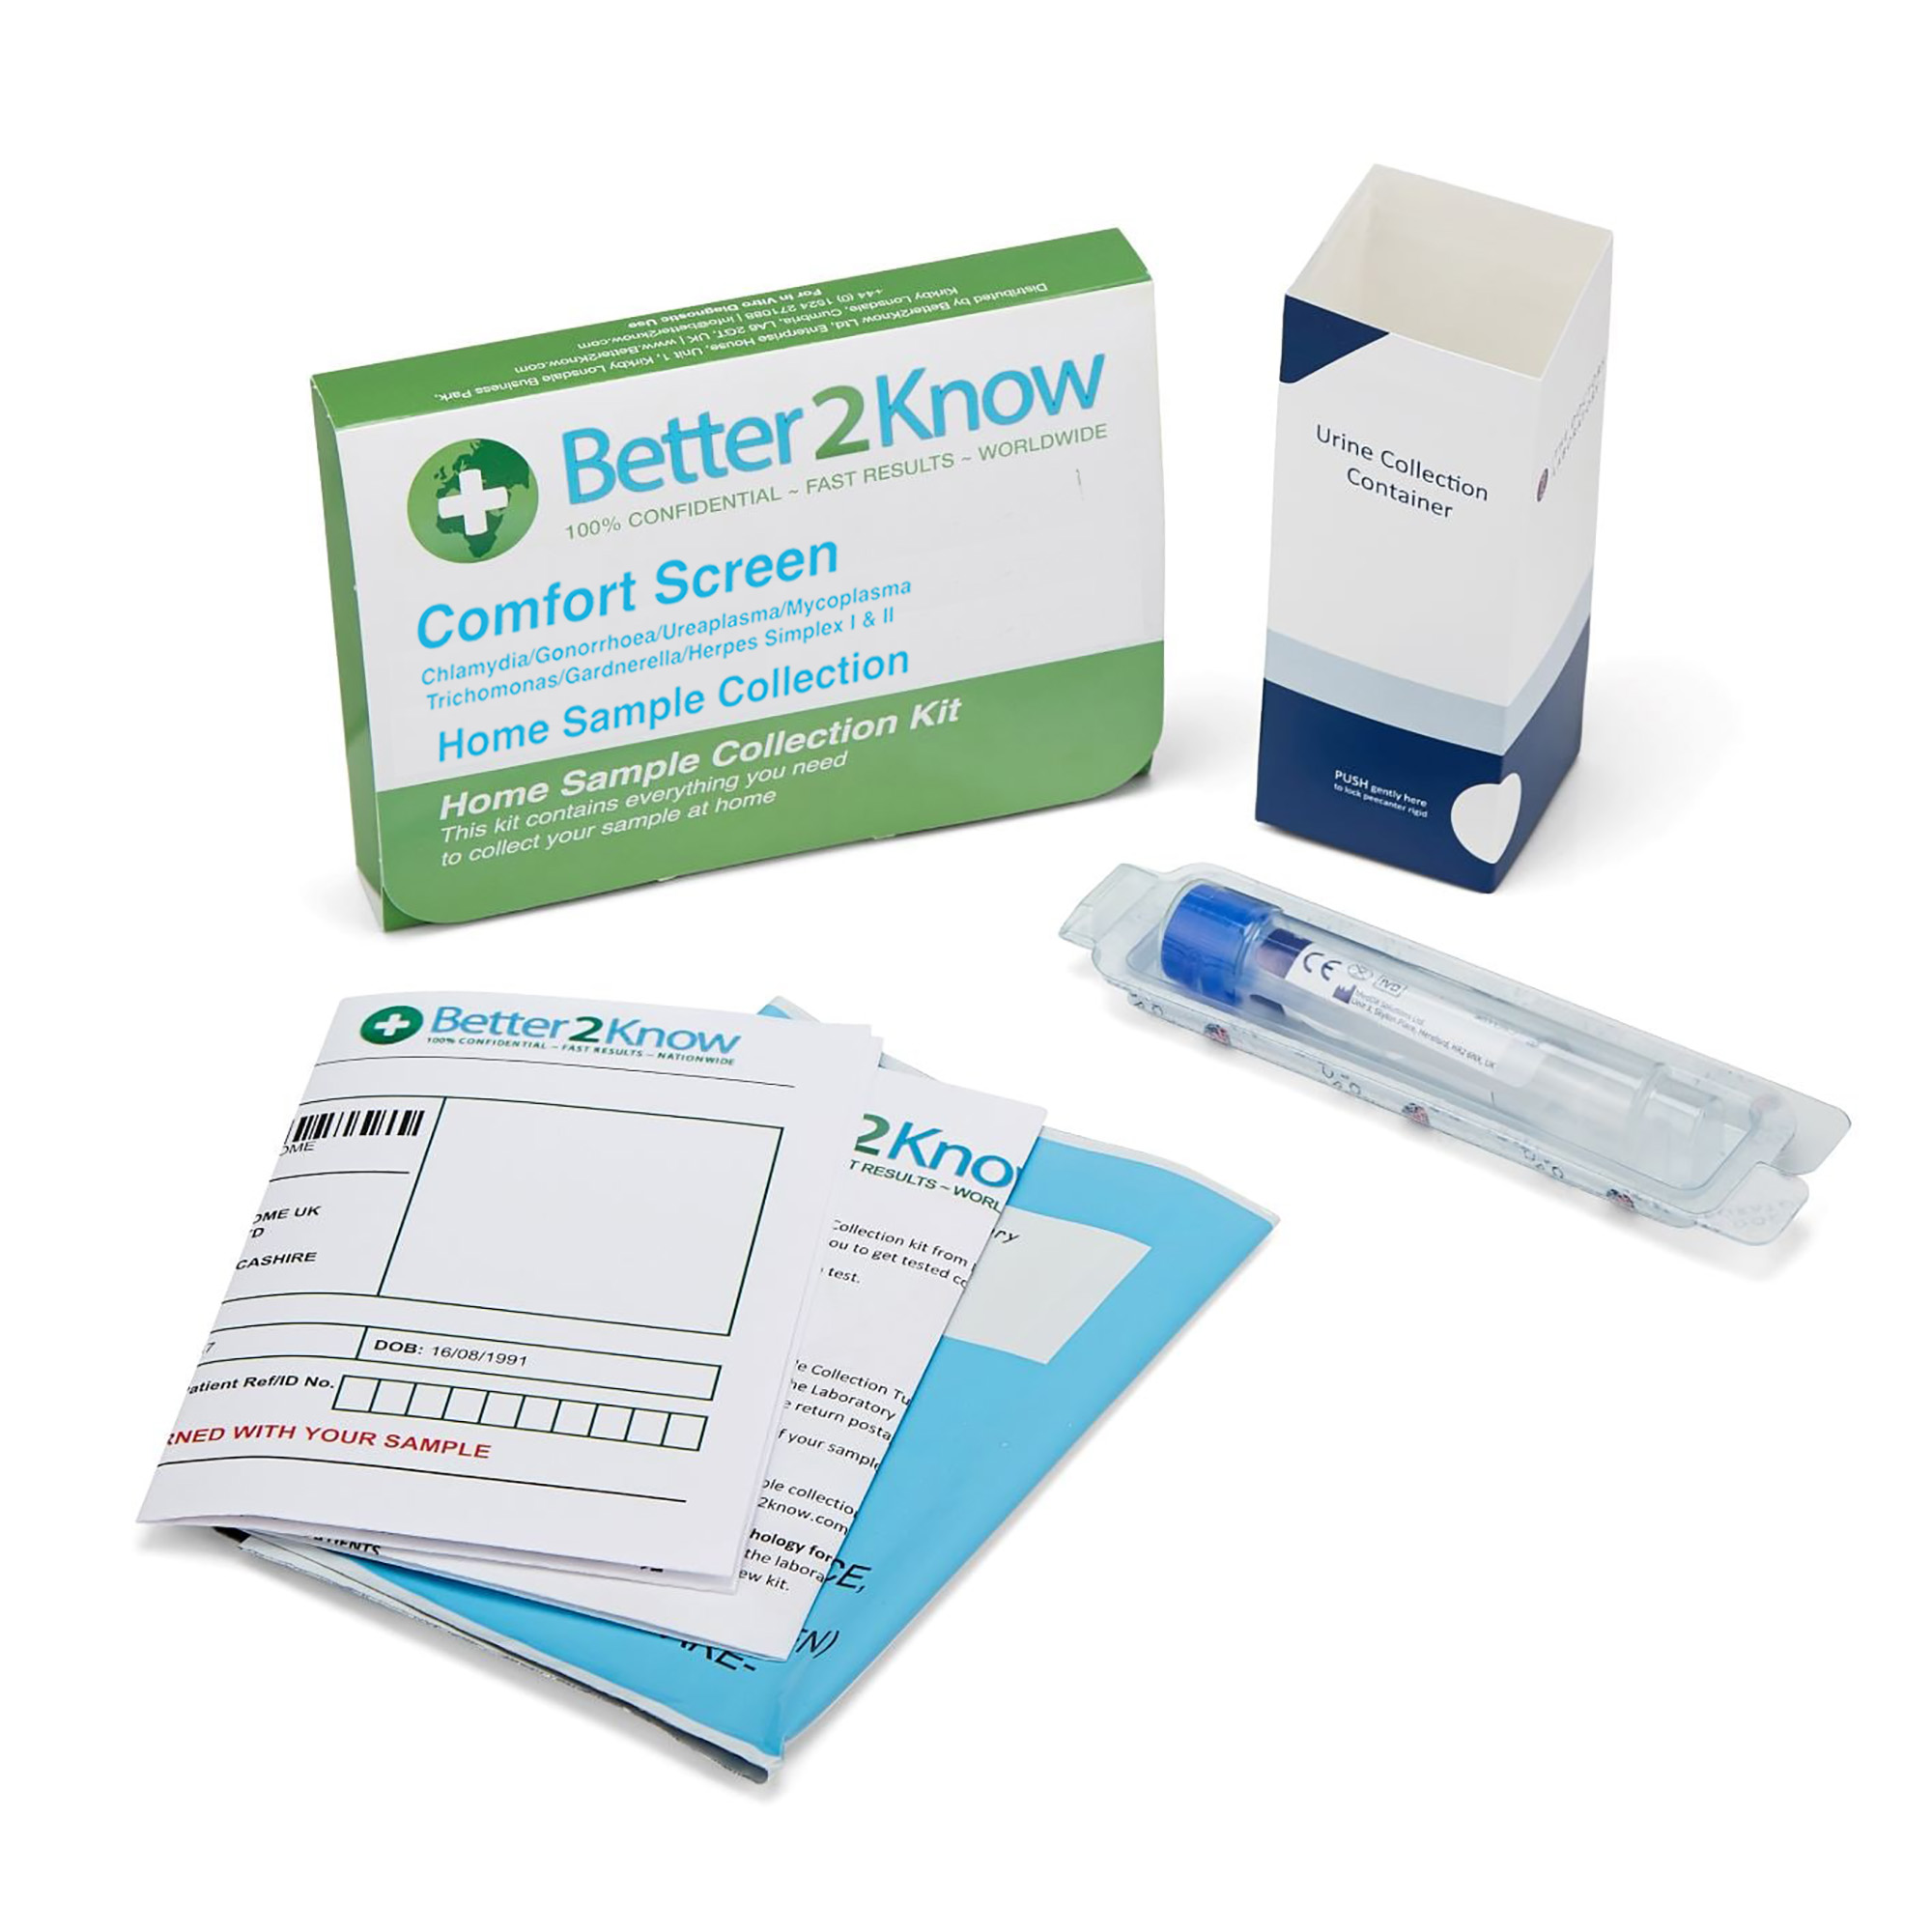 Better2Know&#039;s Comfort Screen tests for seven STIs by urine only.